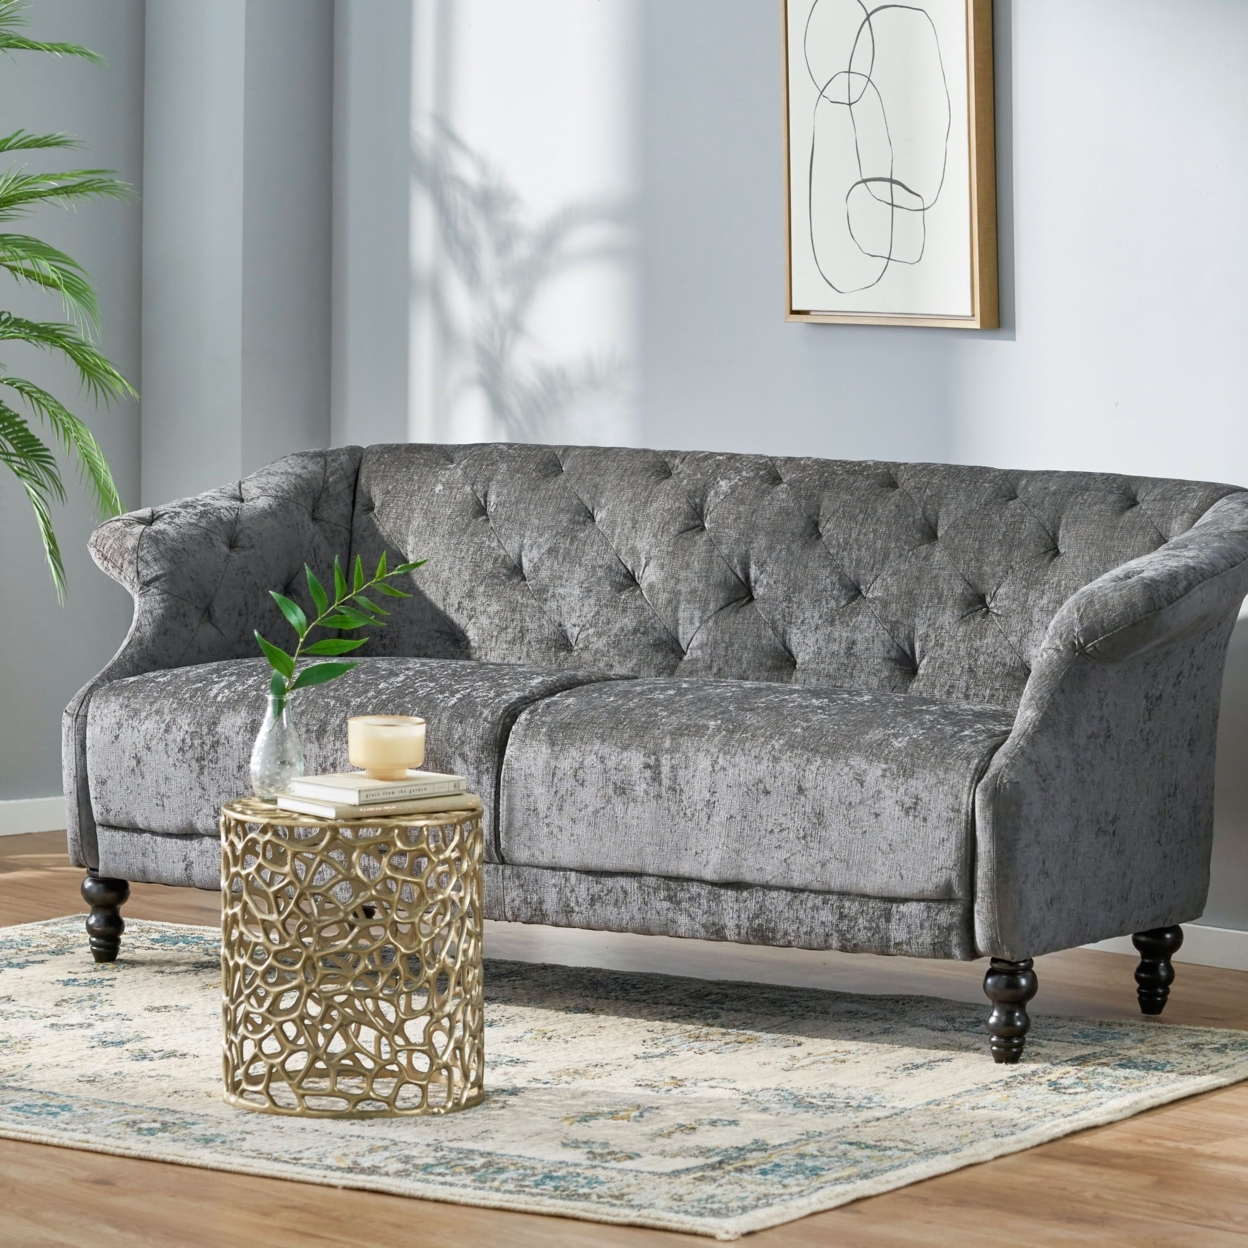 Lavonia Contemporary Tufted 3 Seater Sofa - Dark Brown/dark Charcoal